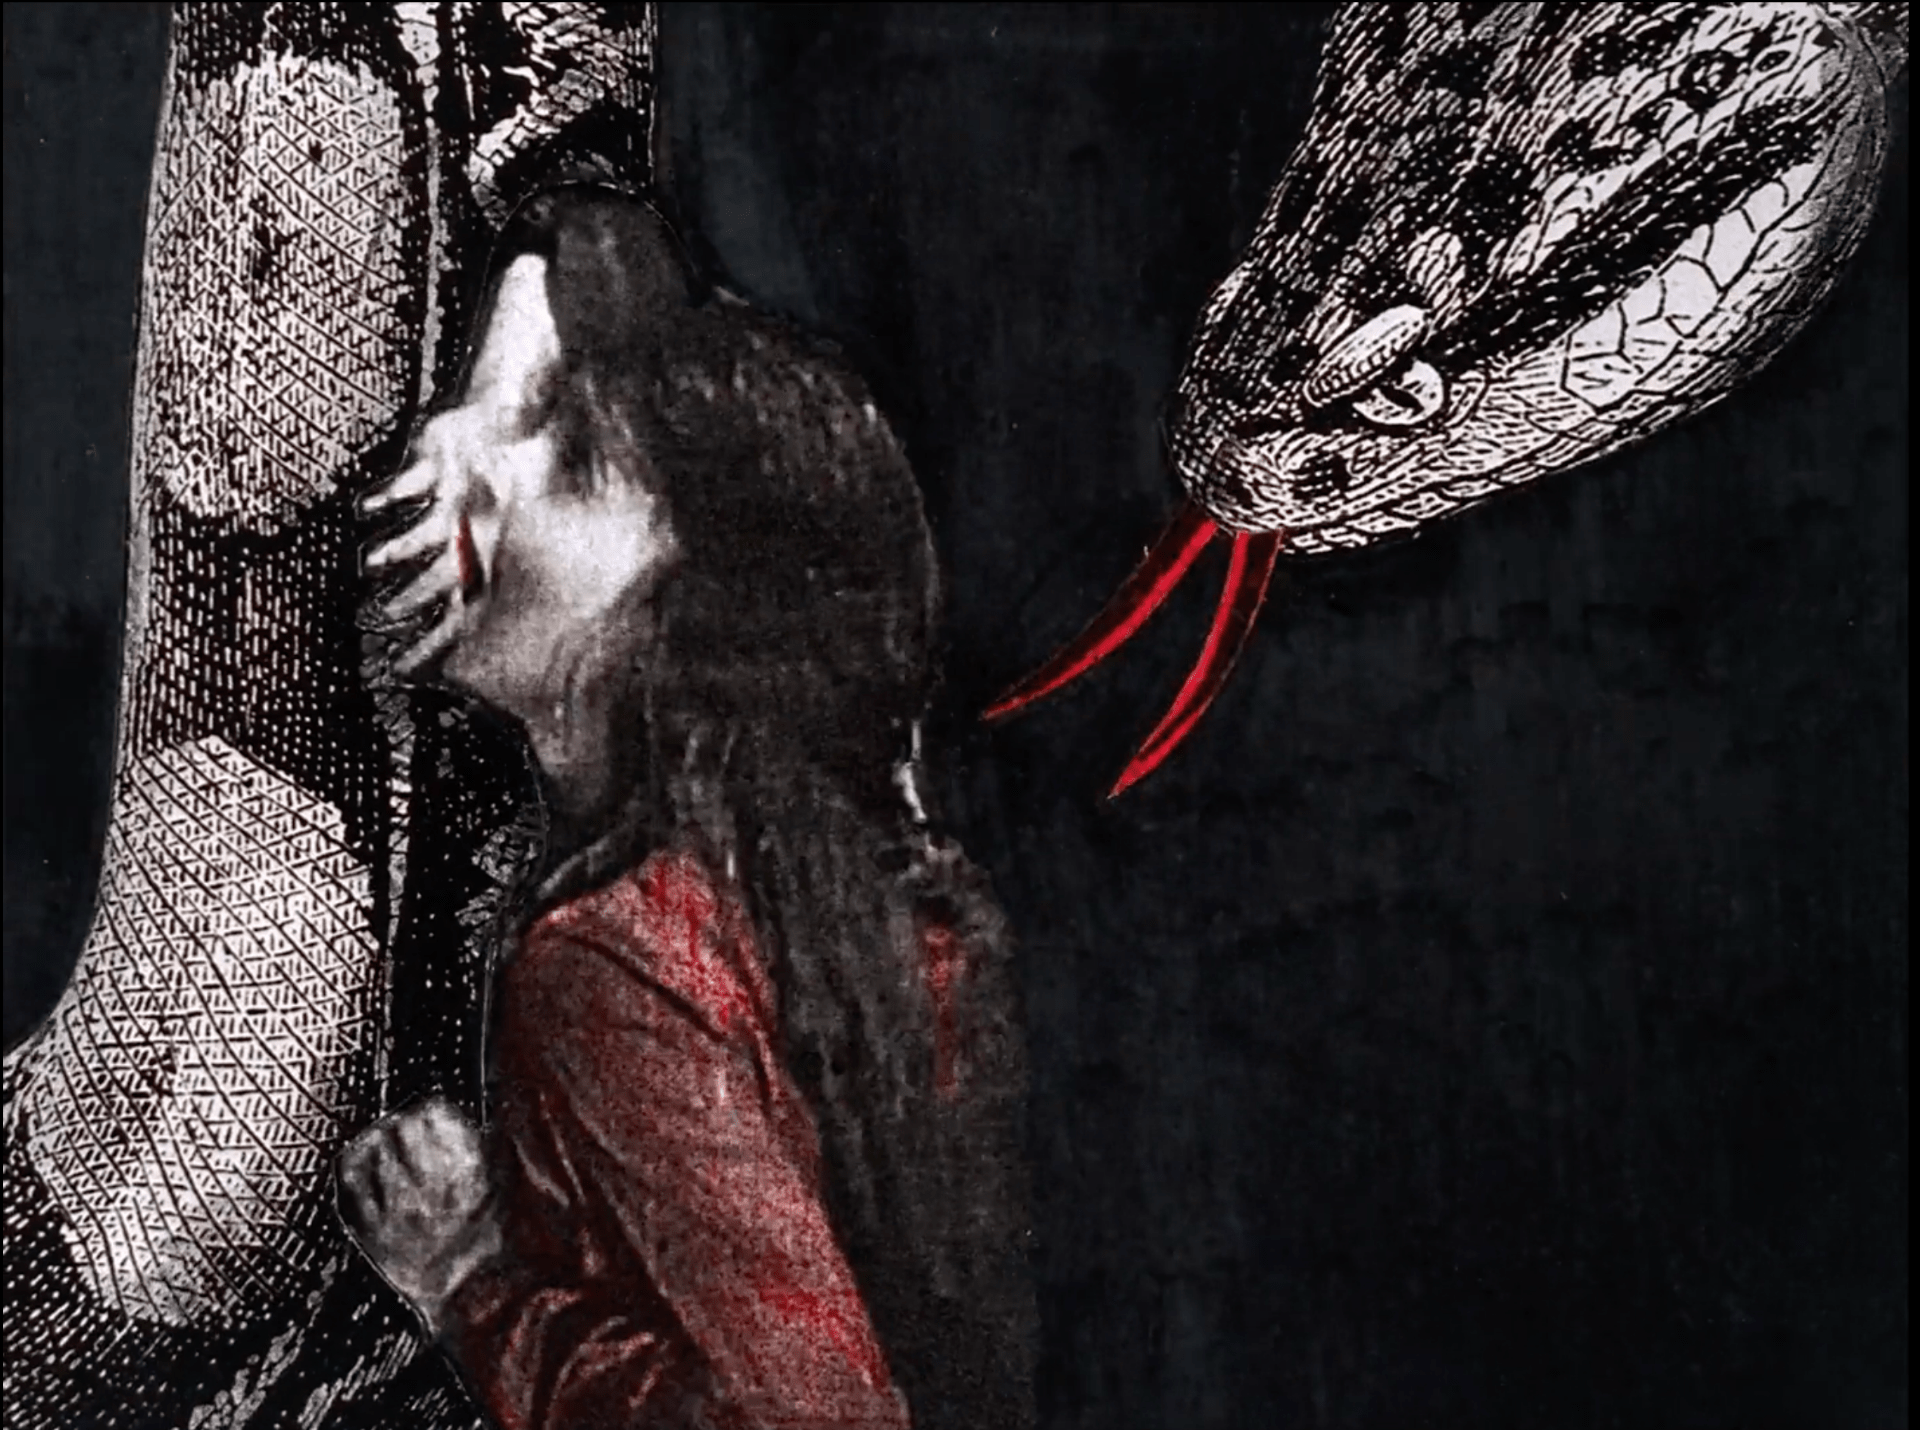 Lillian Gish leans against the body of a giant snake, crying. Her dress and the snake's tongue are handpainted red while the rest of the image is black and white.